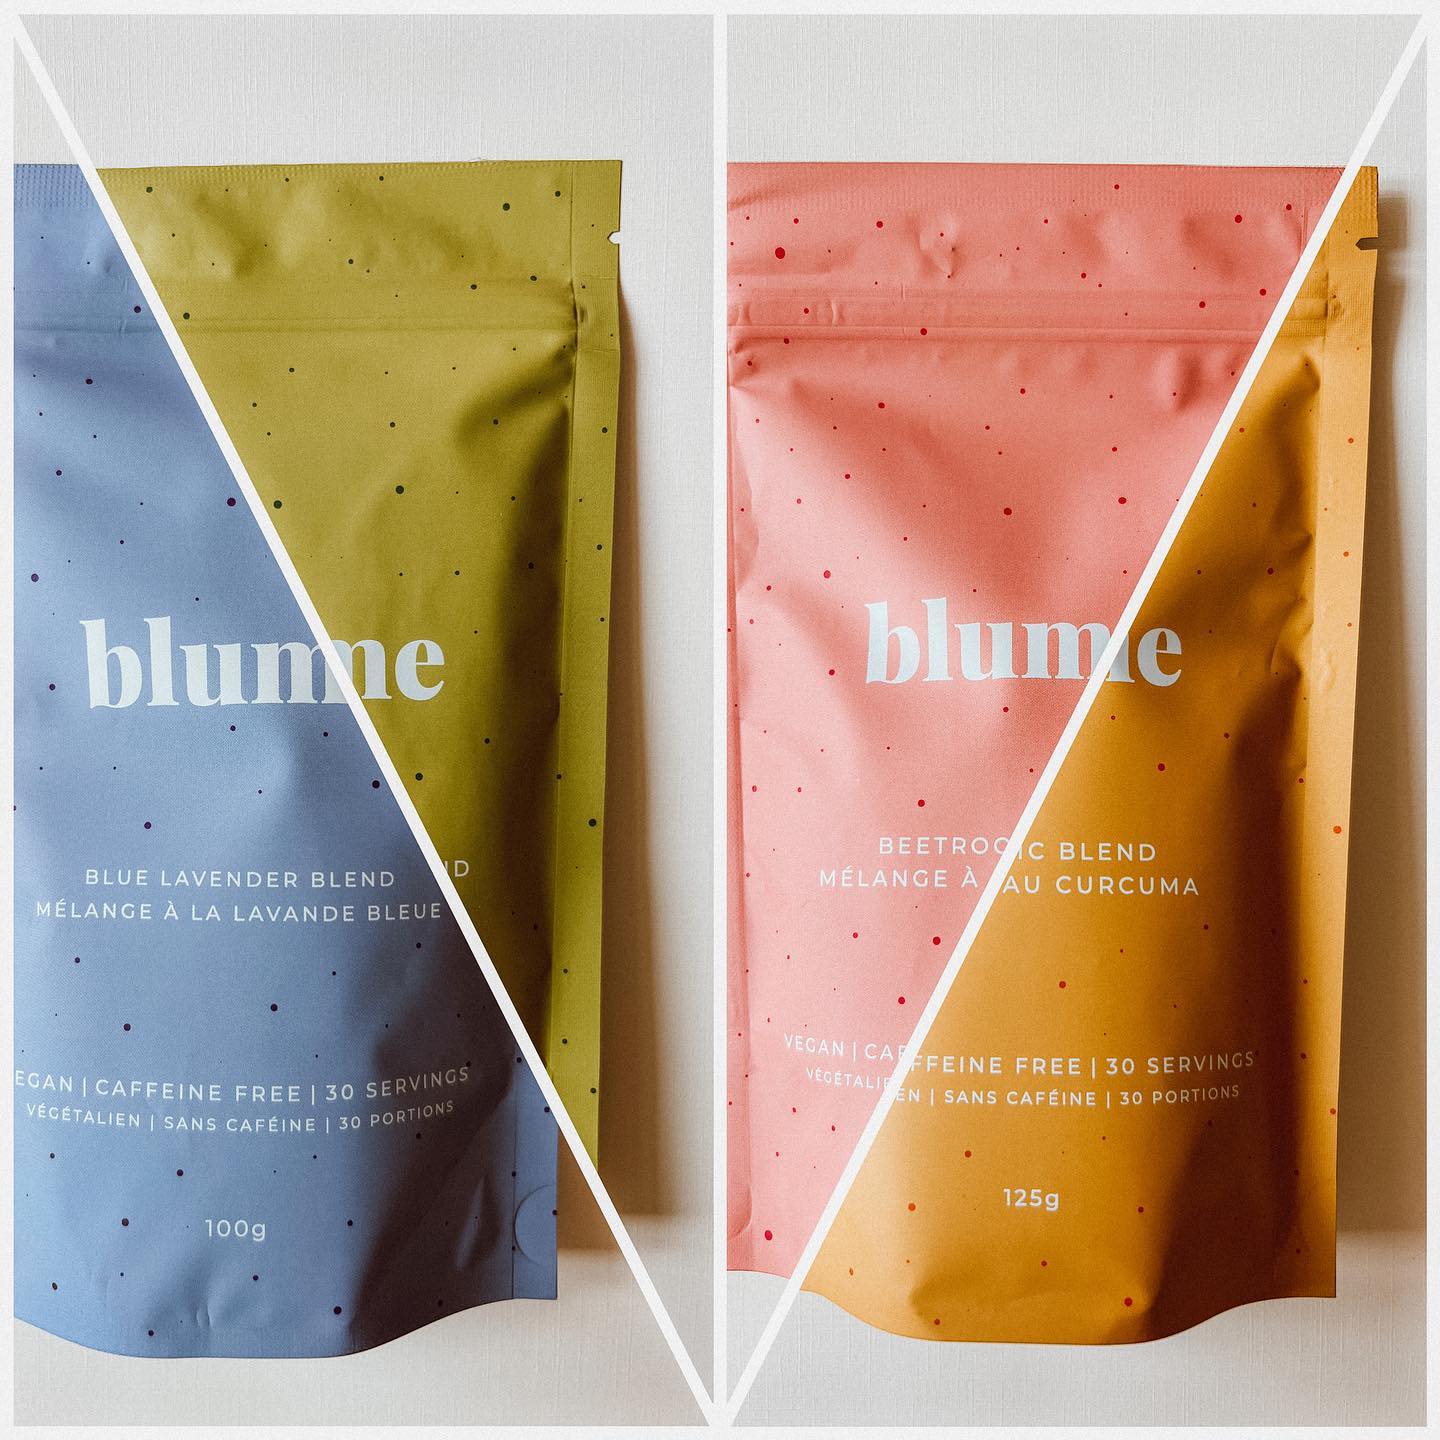 Four different flavours of Blume products are displayed.